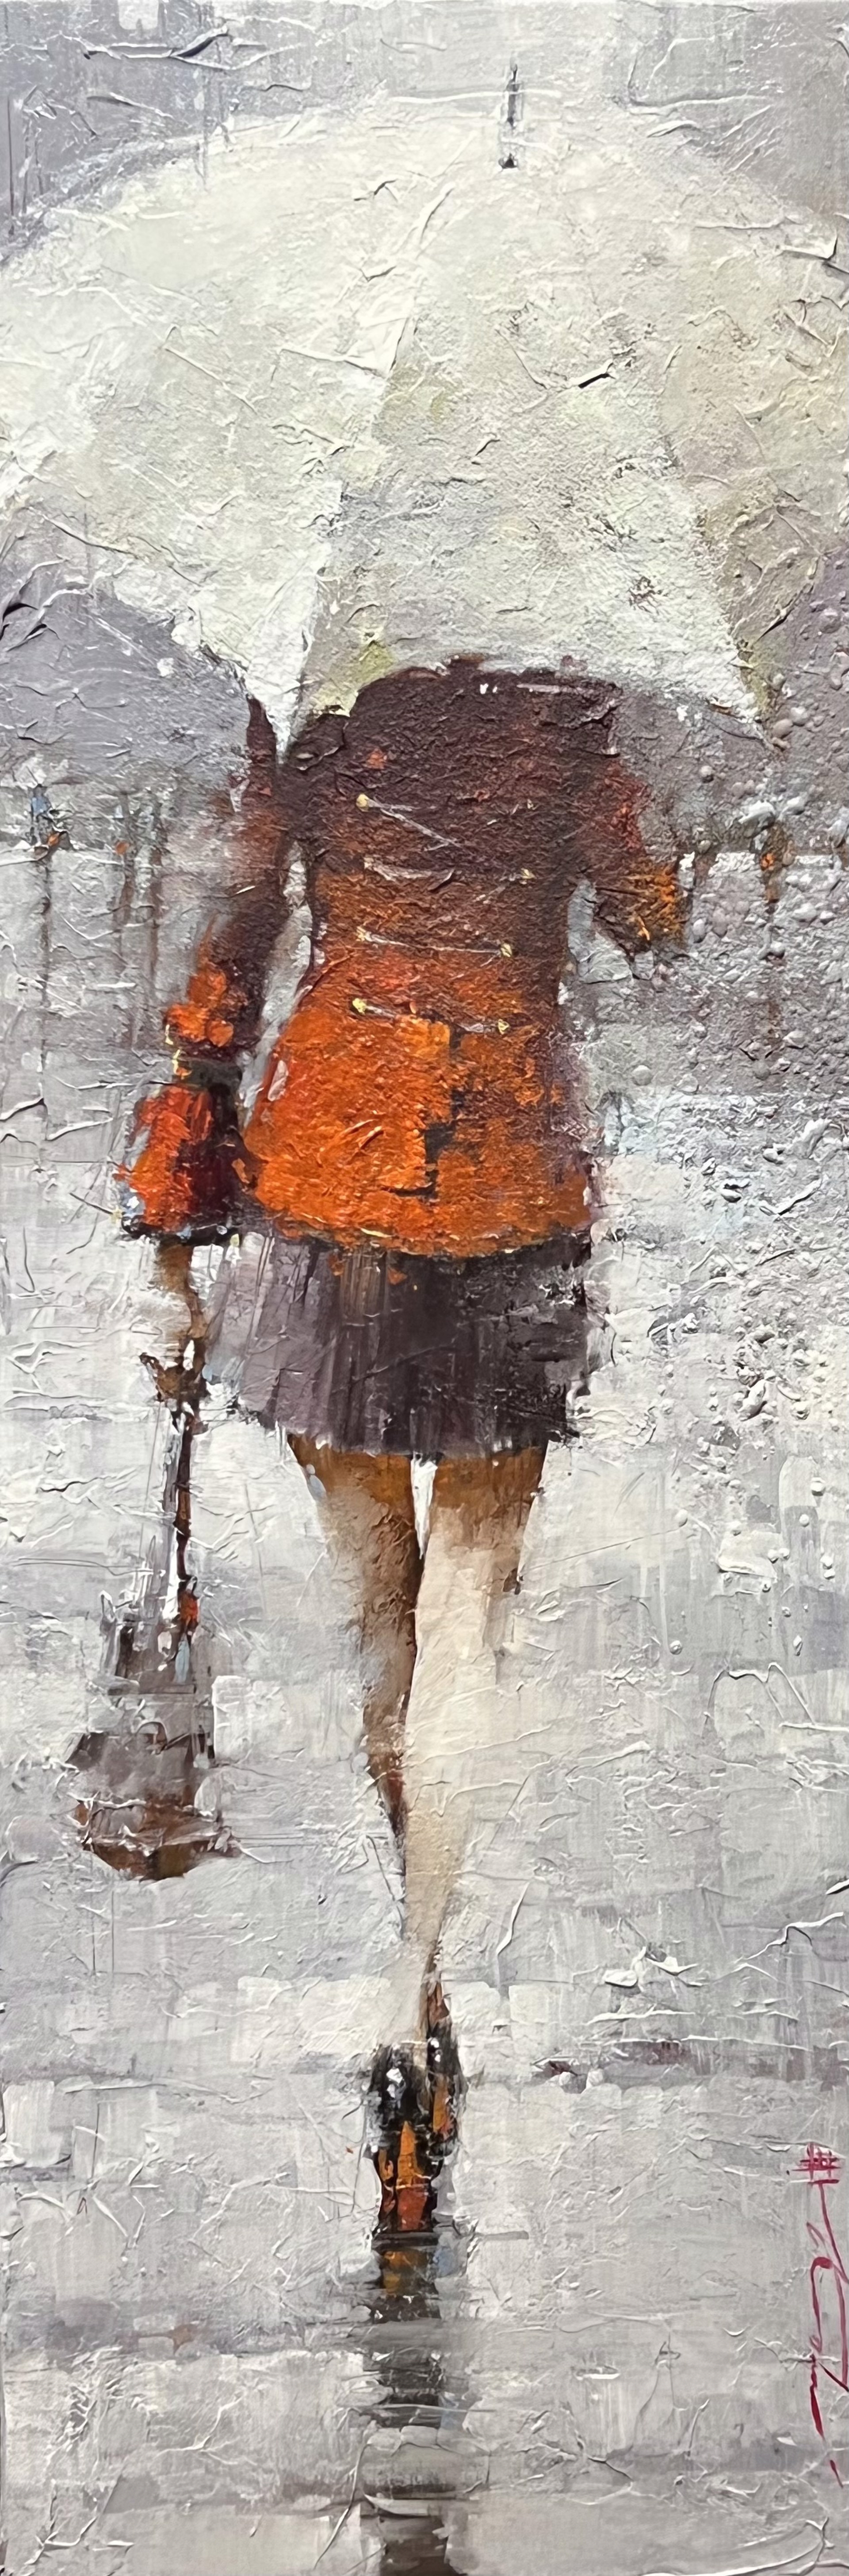 "Commission" by Andre Kohn